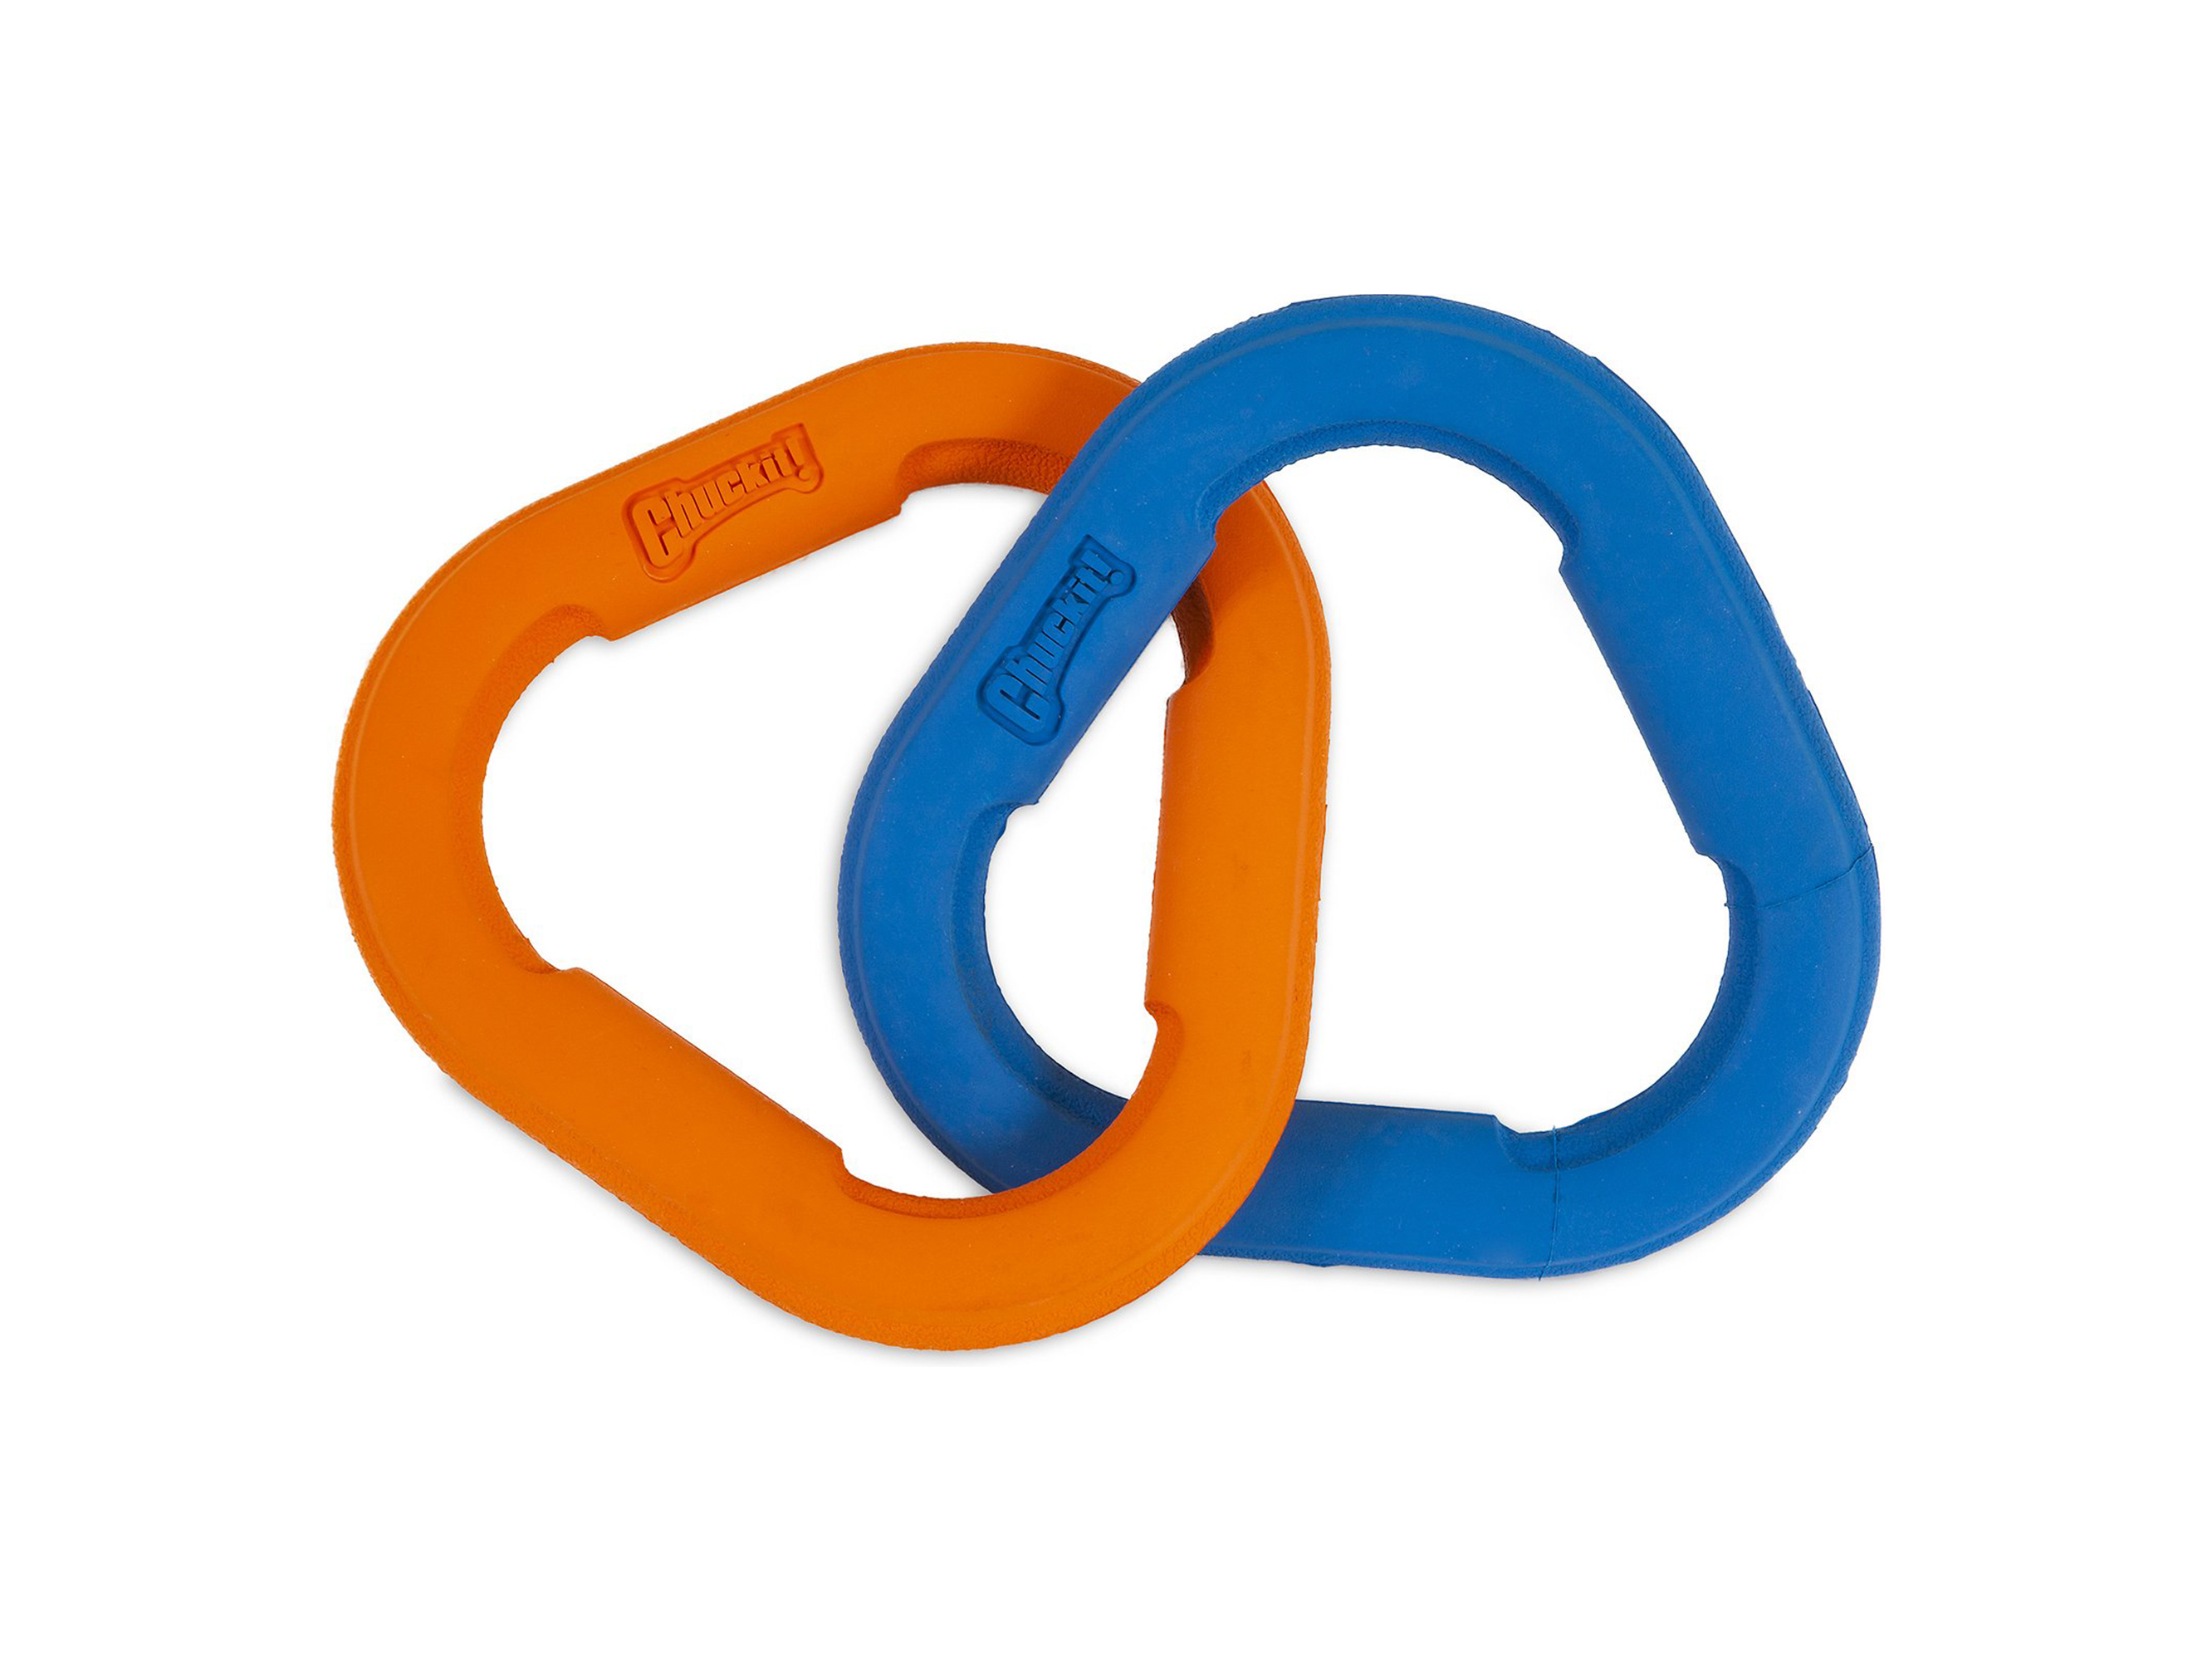 Two triangular rubber links, one blue and one orange.